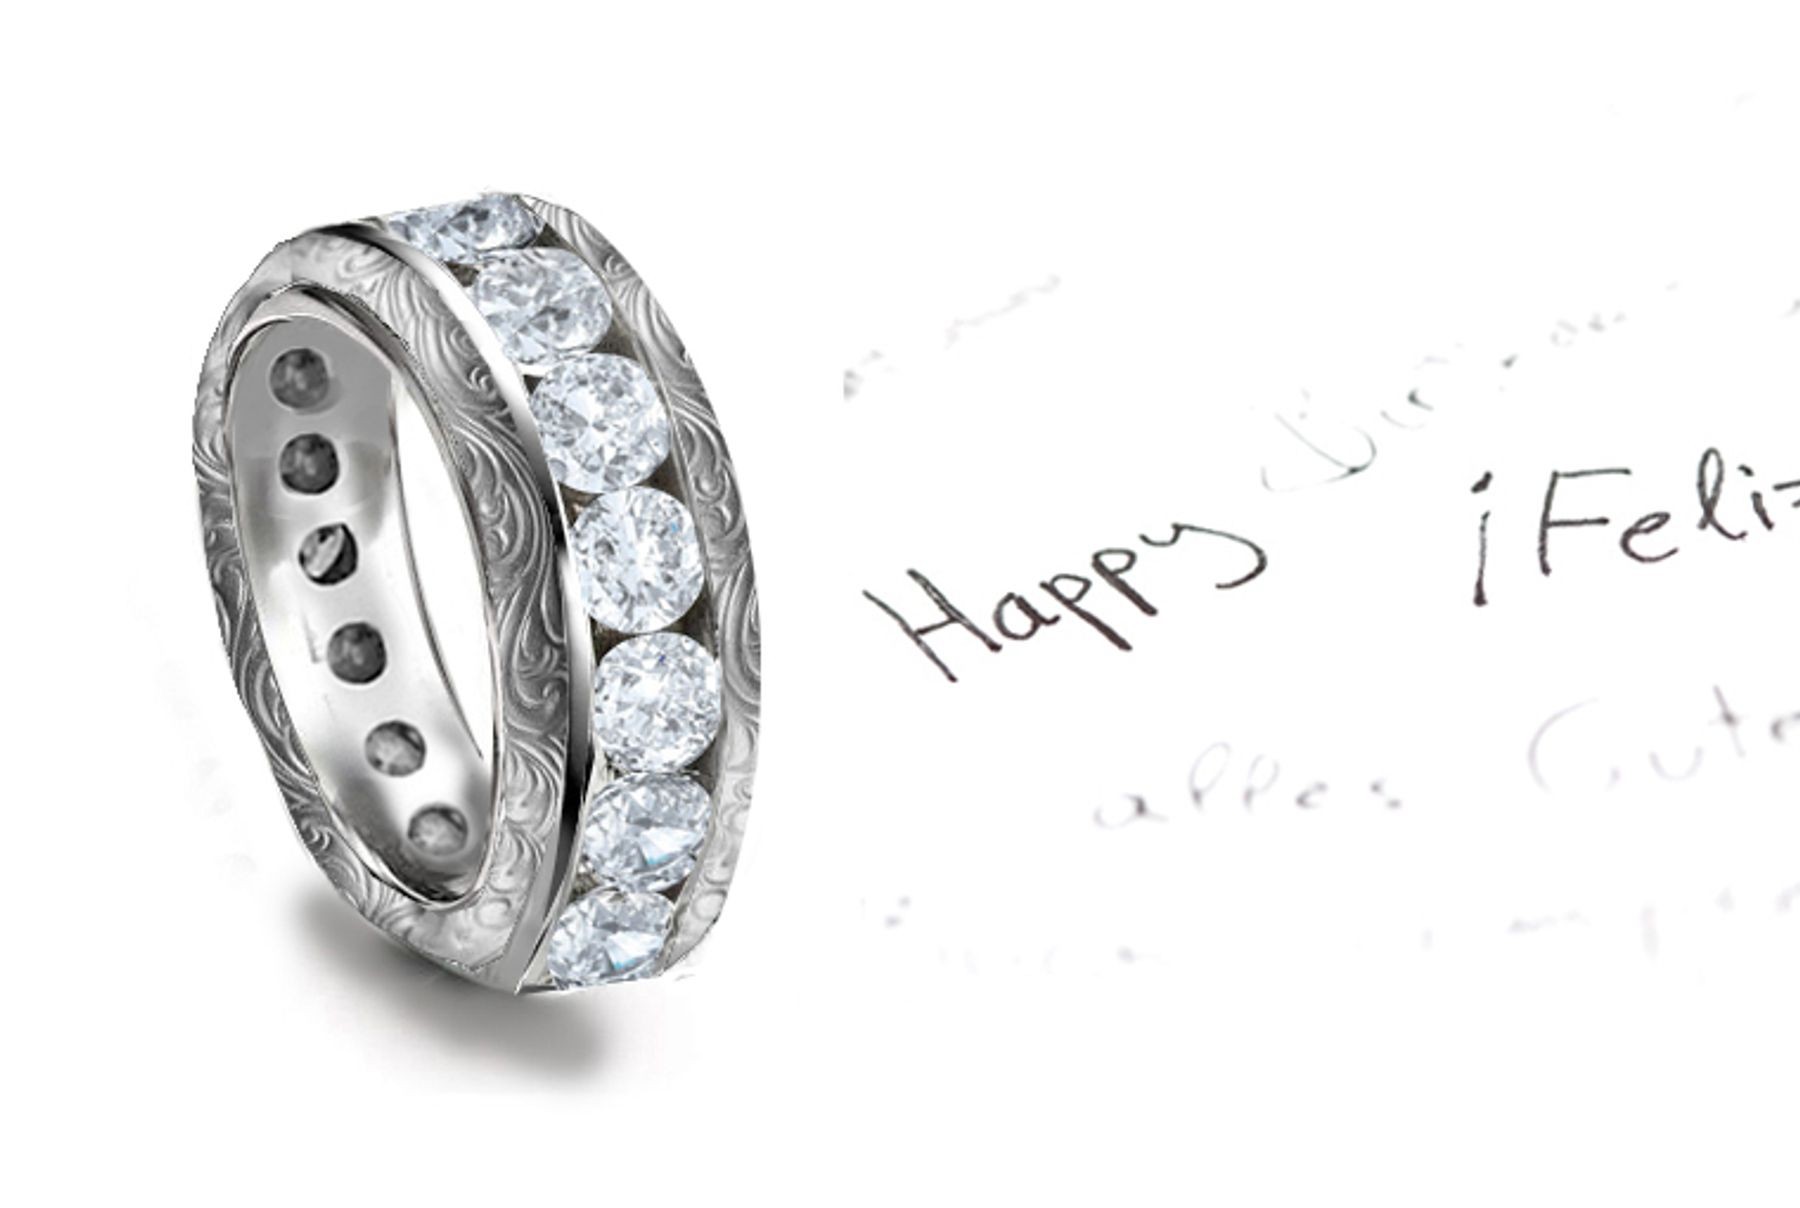 Dramatic: Twinkling Diamonds are Set across the the ring in Scrolling Motifs Gold Channel